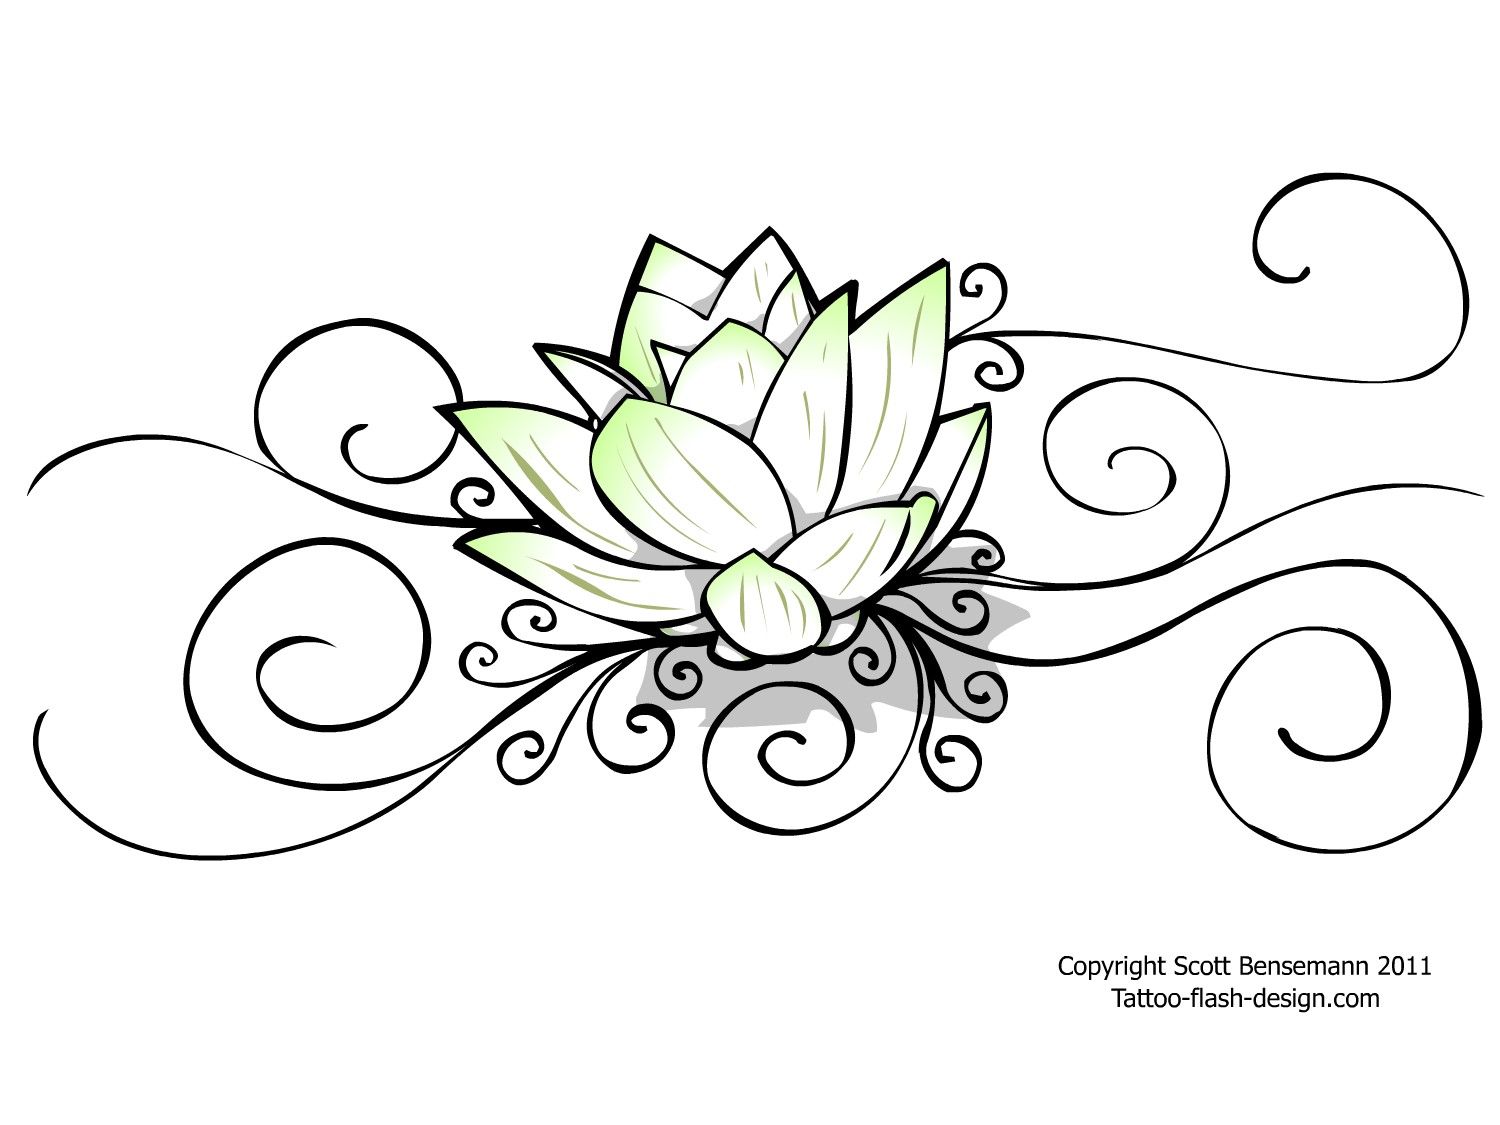 Japanese Water Lily Tattoo Design: Real Photo, Pictures, Images ...